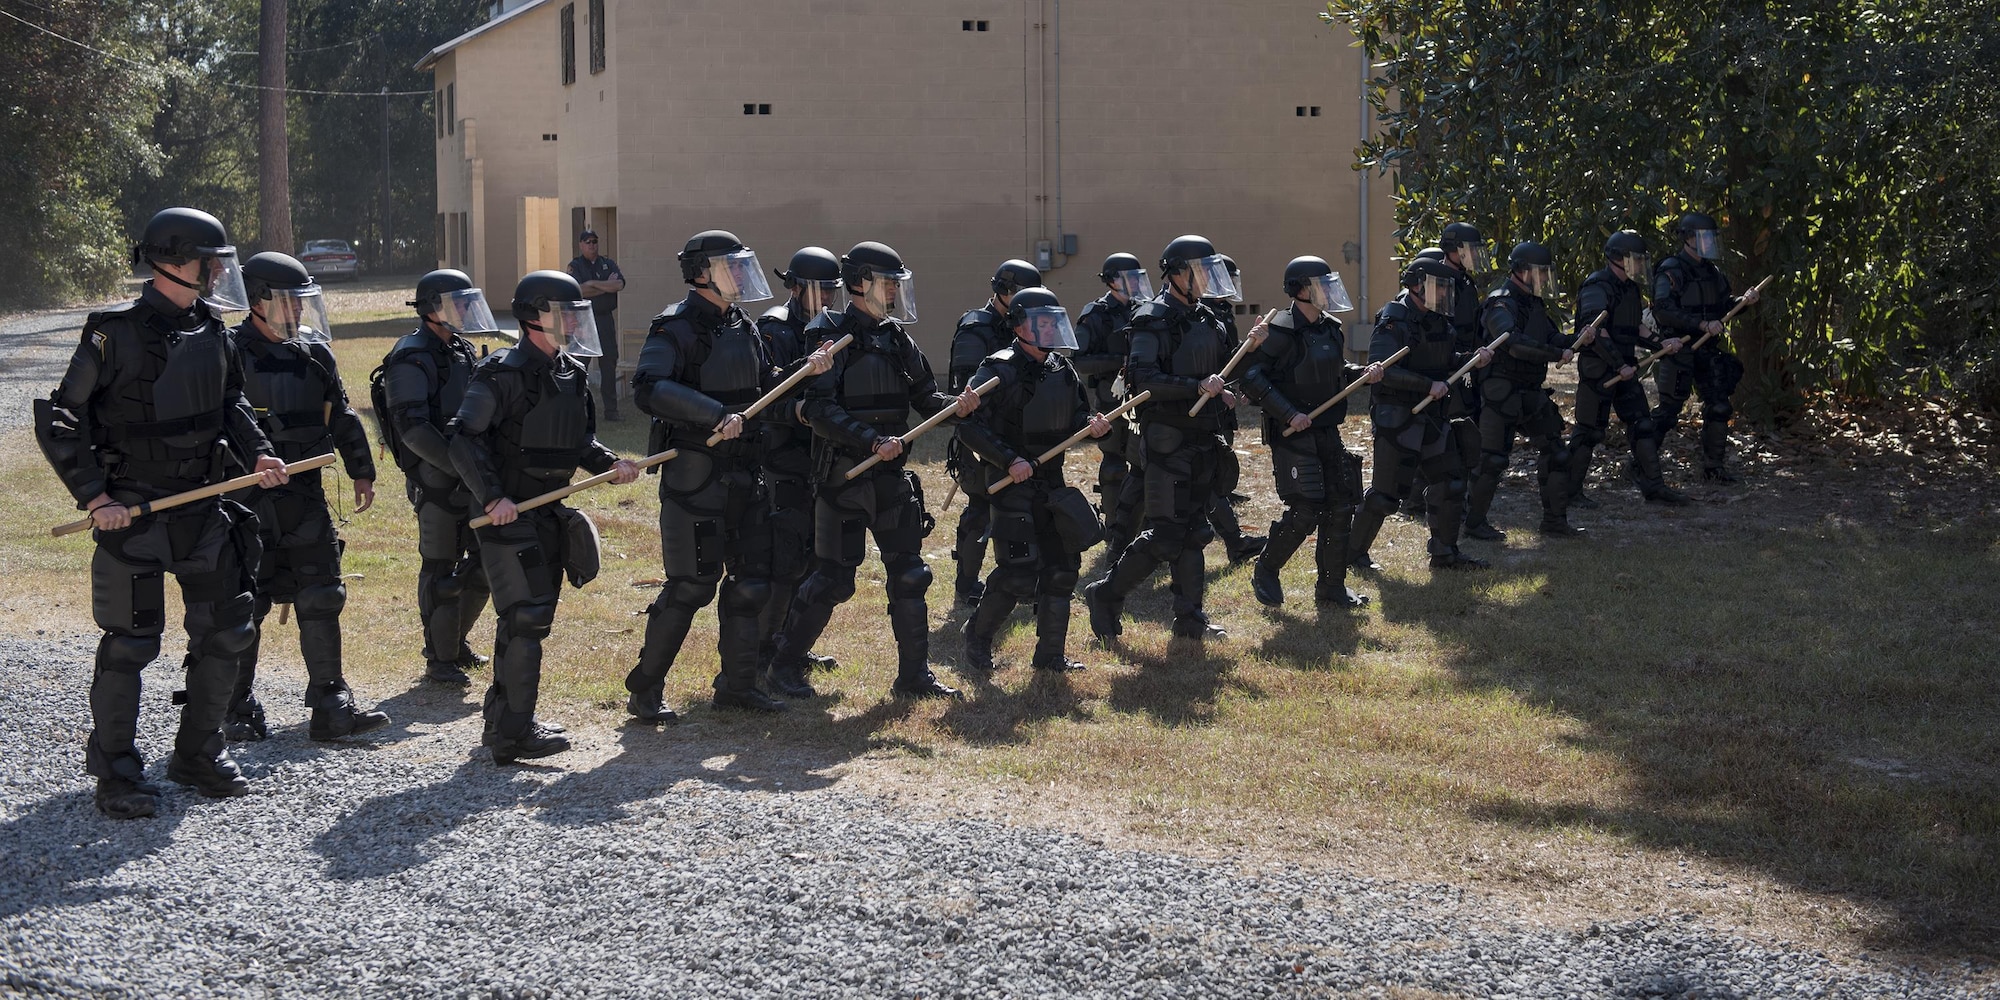 Georgia State Patrol’s Mobile Field Force create a wall of police officers as they march forward, Nov. 16, 2016, at Moody Air Force Base, Ga. The GSP conducts semiannual riot control training to ensure readiness if a situation arises. (U.S. Air Force photo by Airman 1st Class Daniel Snider)